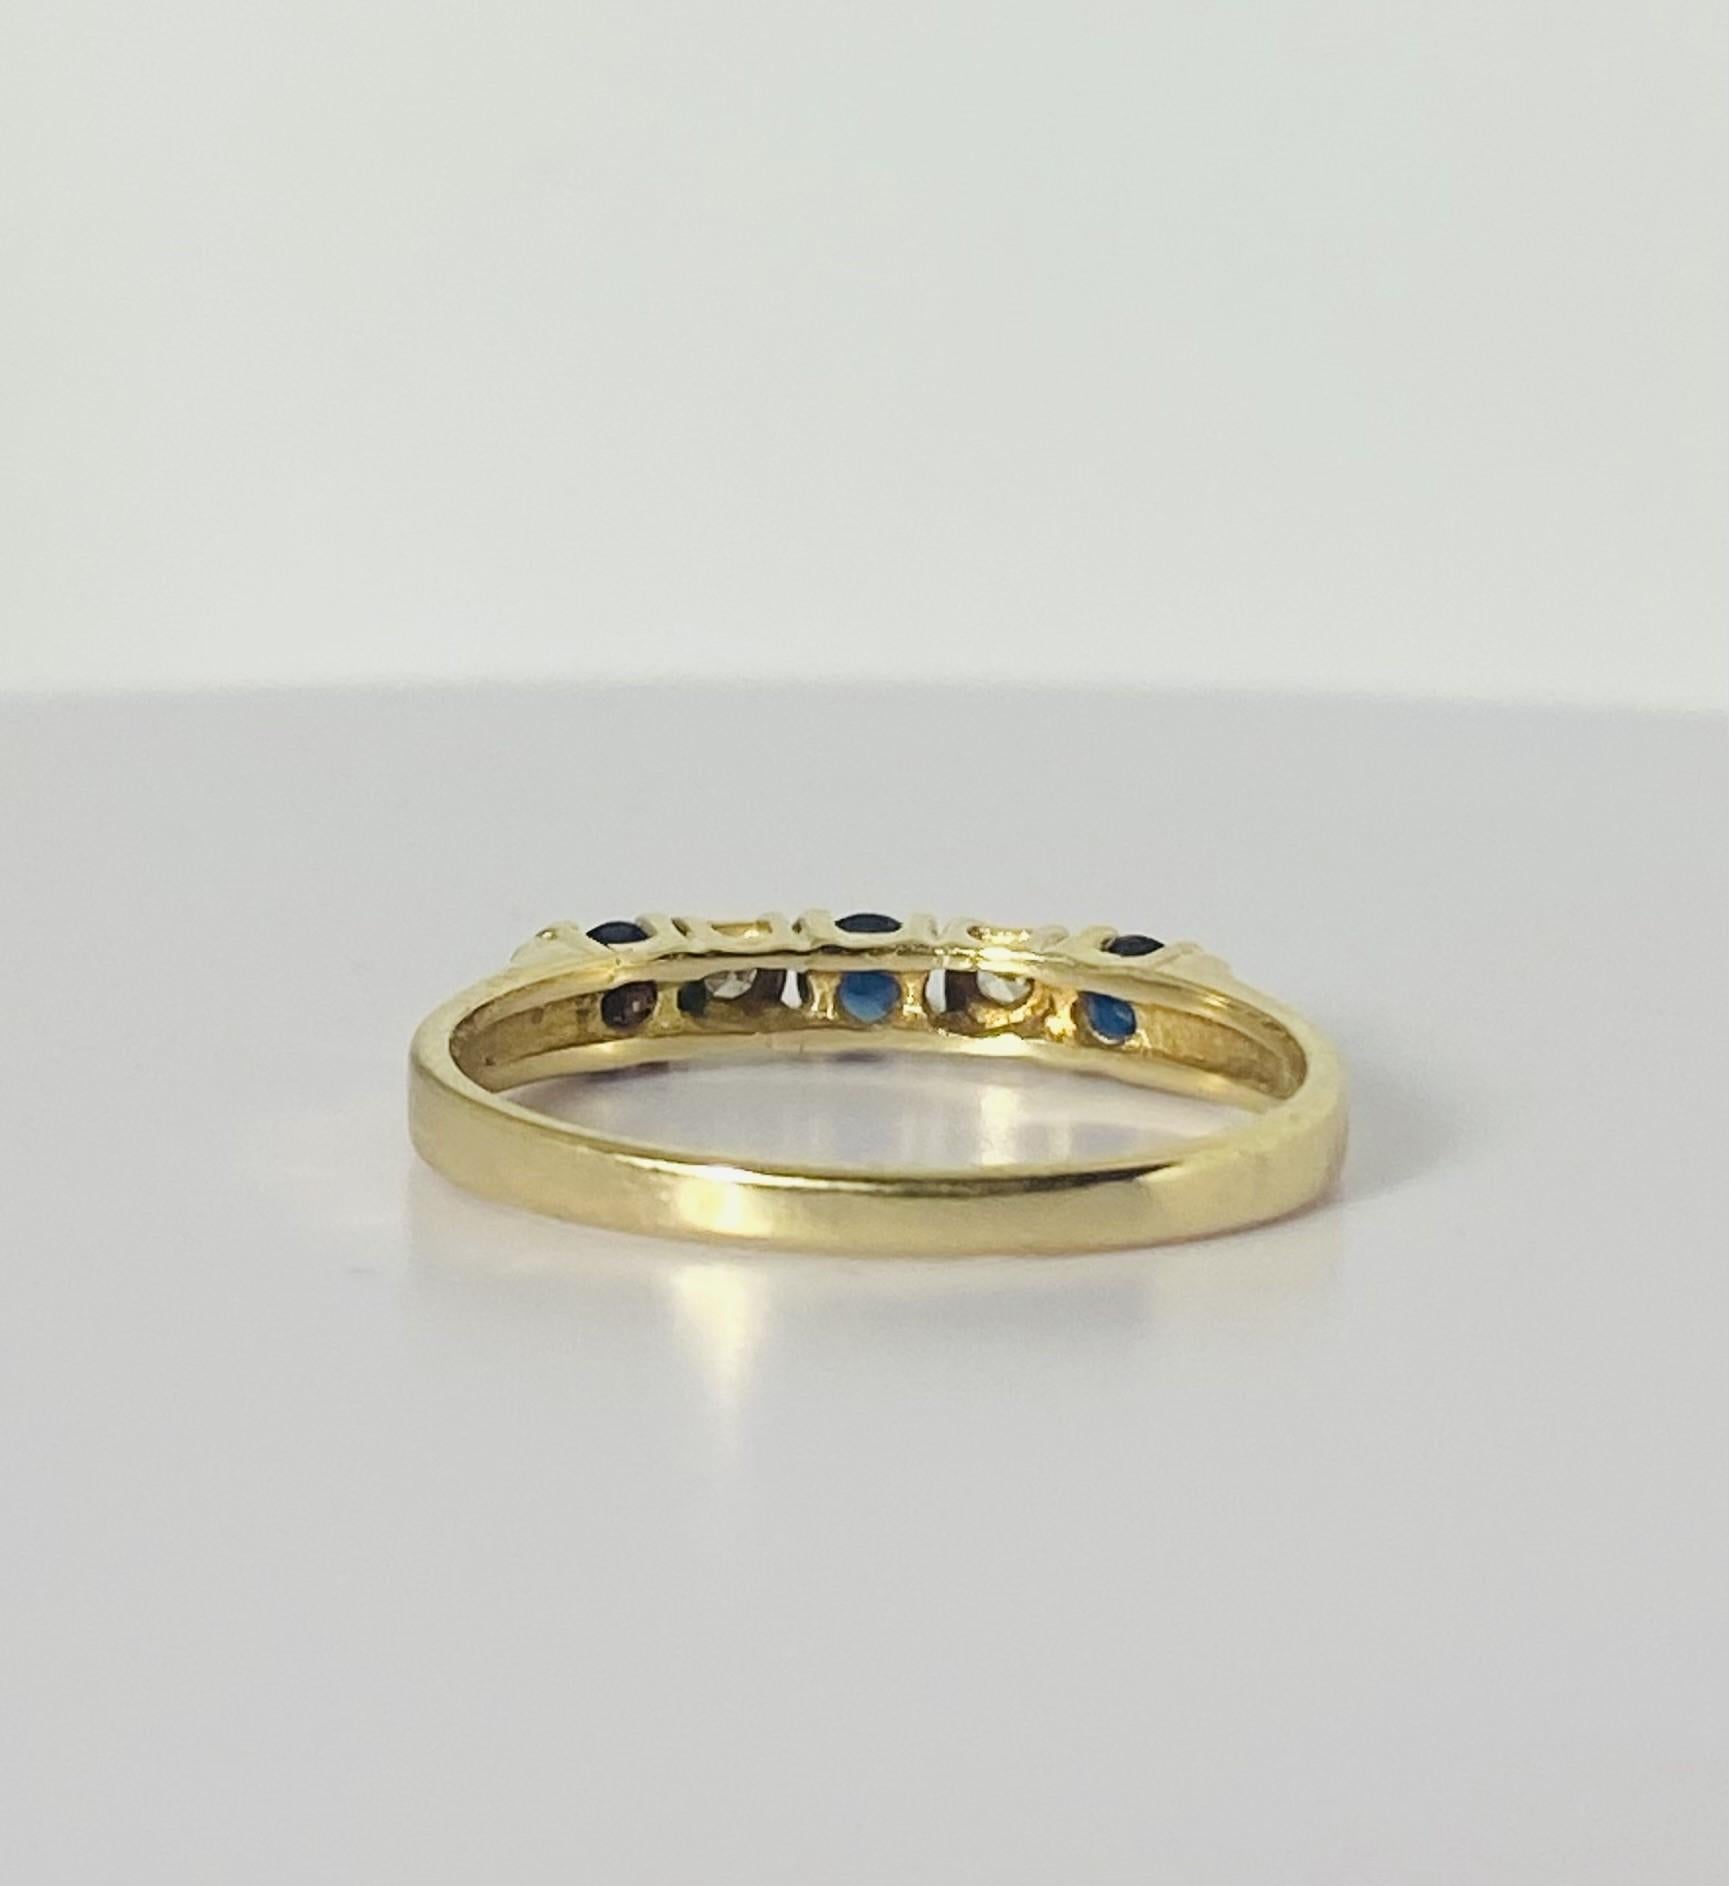 Vintage ring with blue sapphires & diamonds from the 1950S, 14 carat yellow gold 1